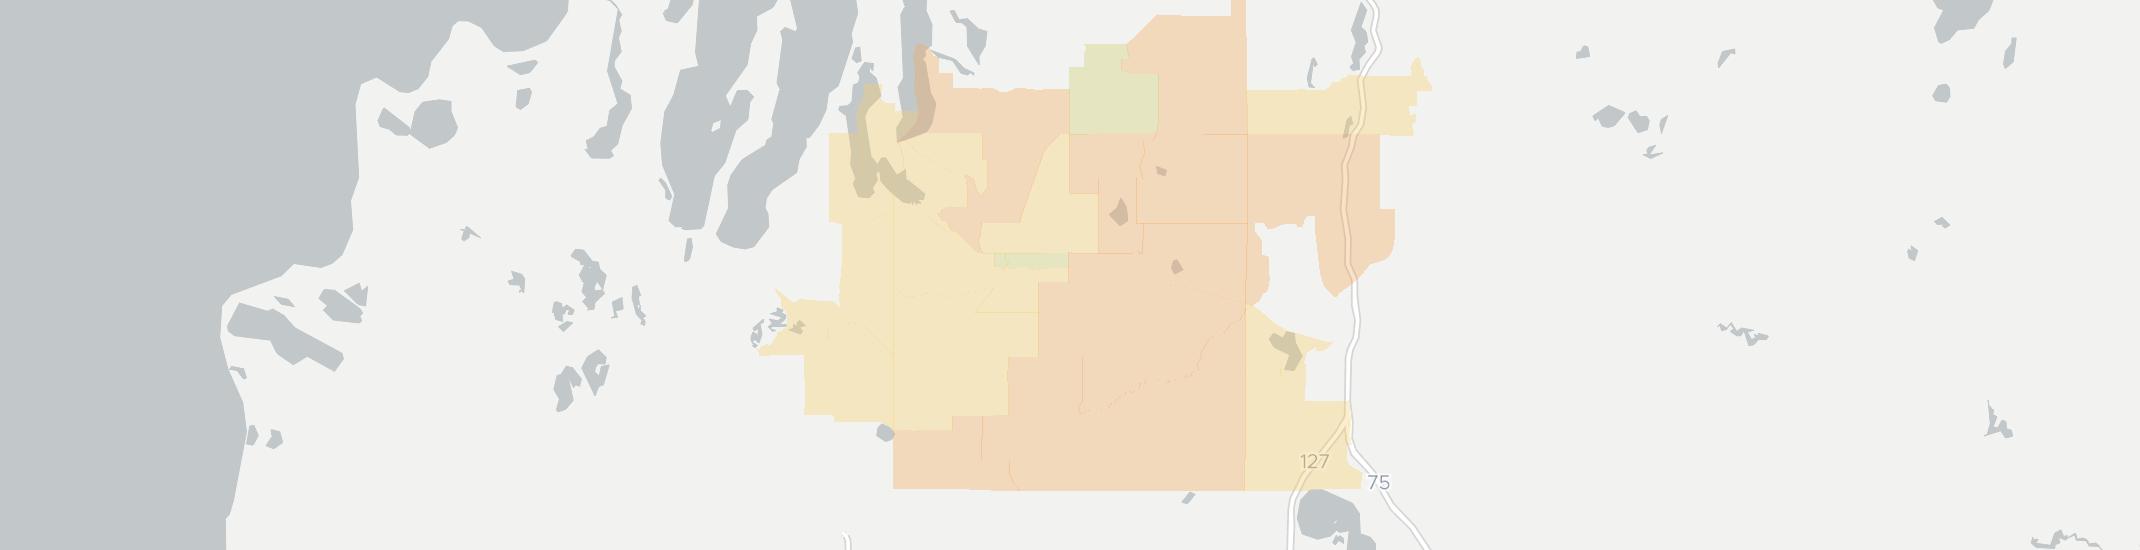 Kalkaska Internet Competition Map. Click for interactive map.